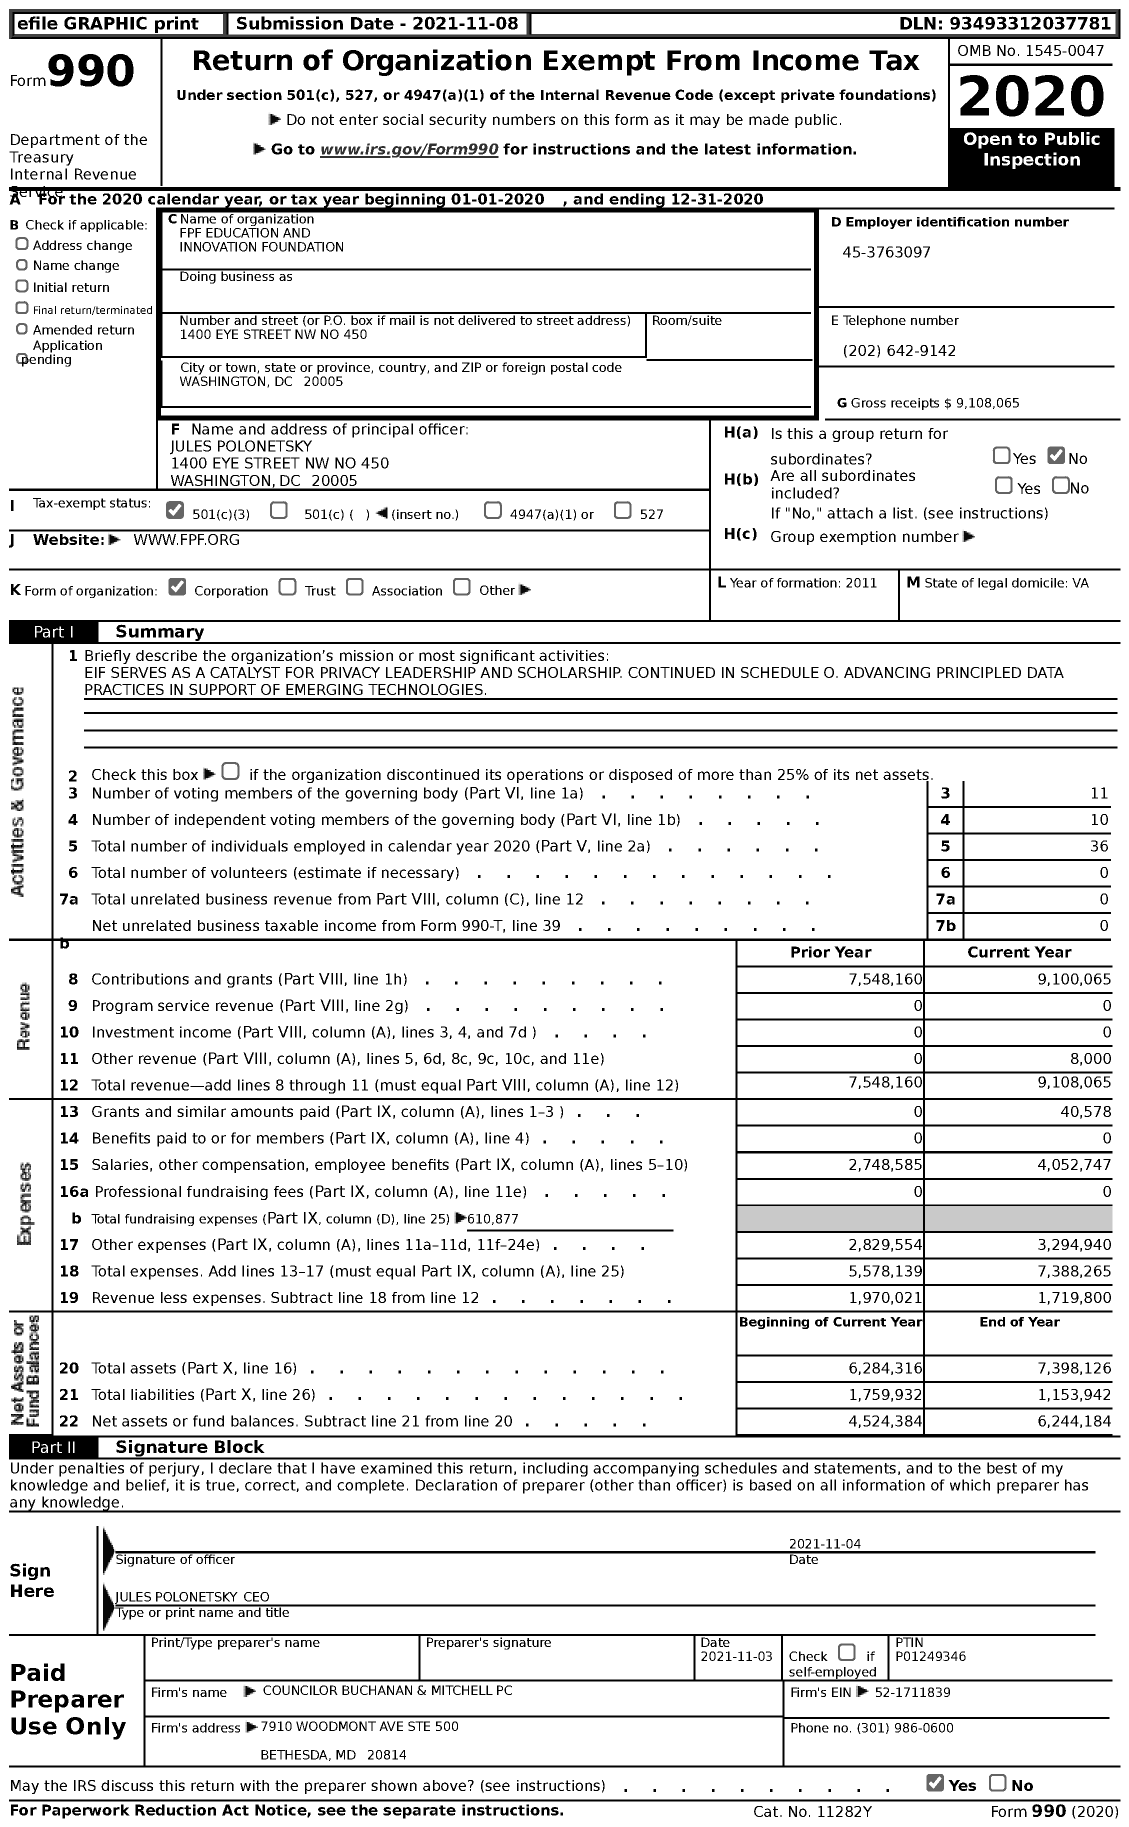 Image of first page of 2020 Form 990 for FPF Education and Innovation Foundation